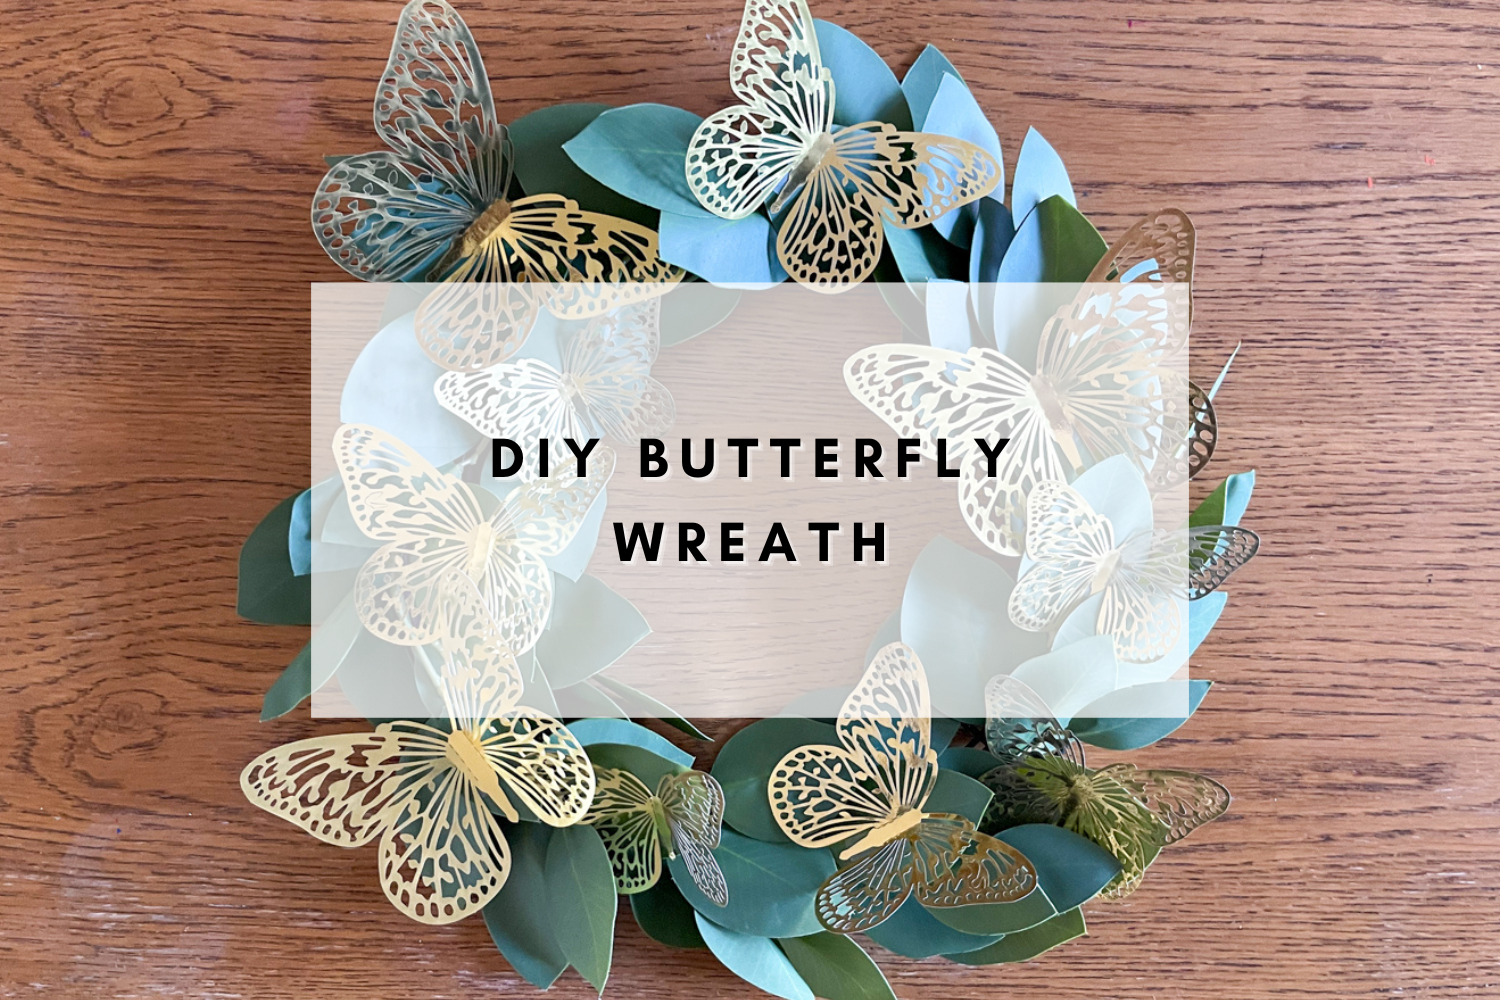 How to Make a DIY Butterfly Wreath